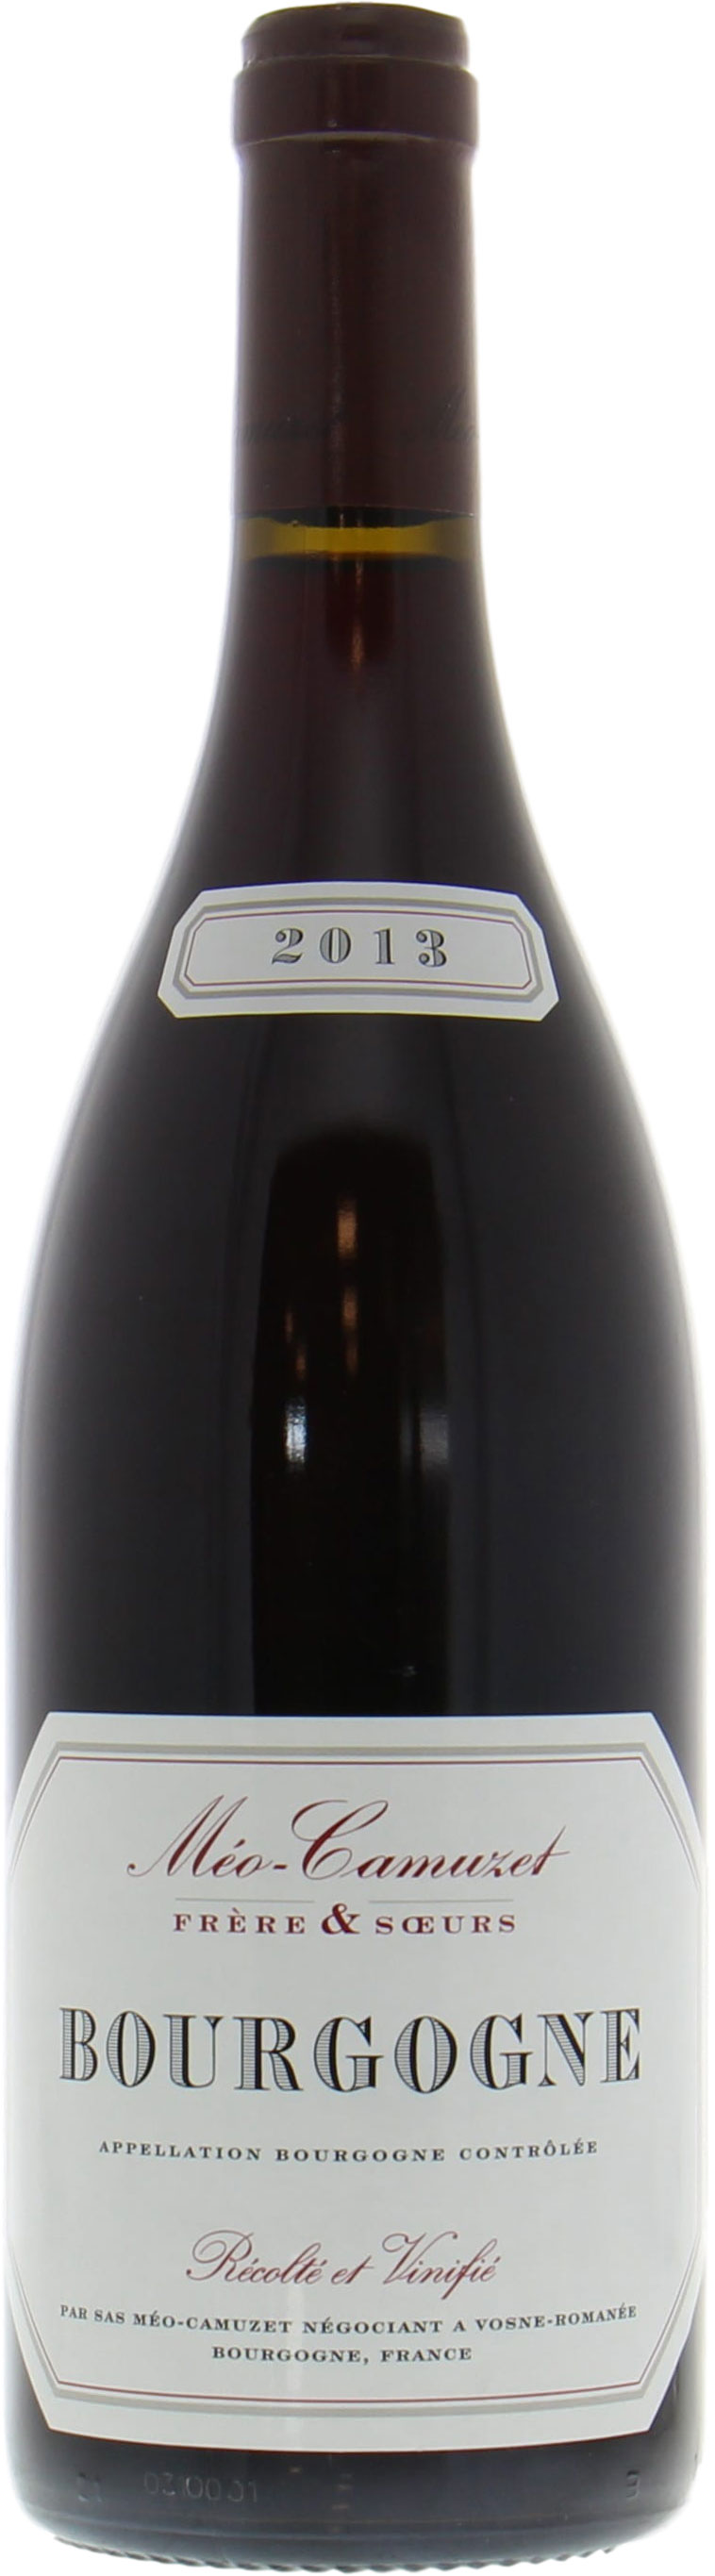 Meo Camuzet - Bourgogne Rouge Pinot Noir 2013 Perfect